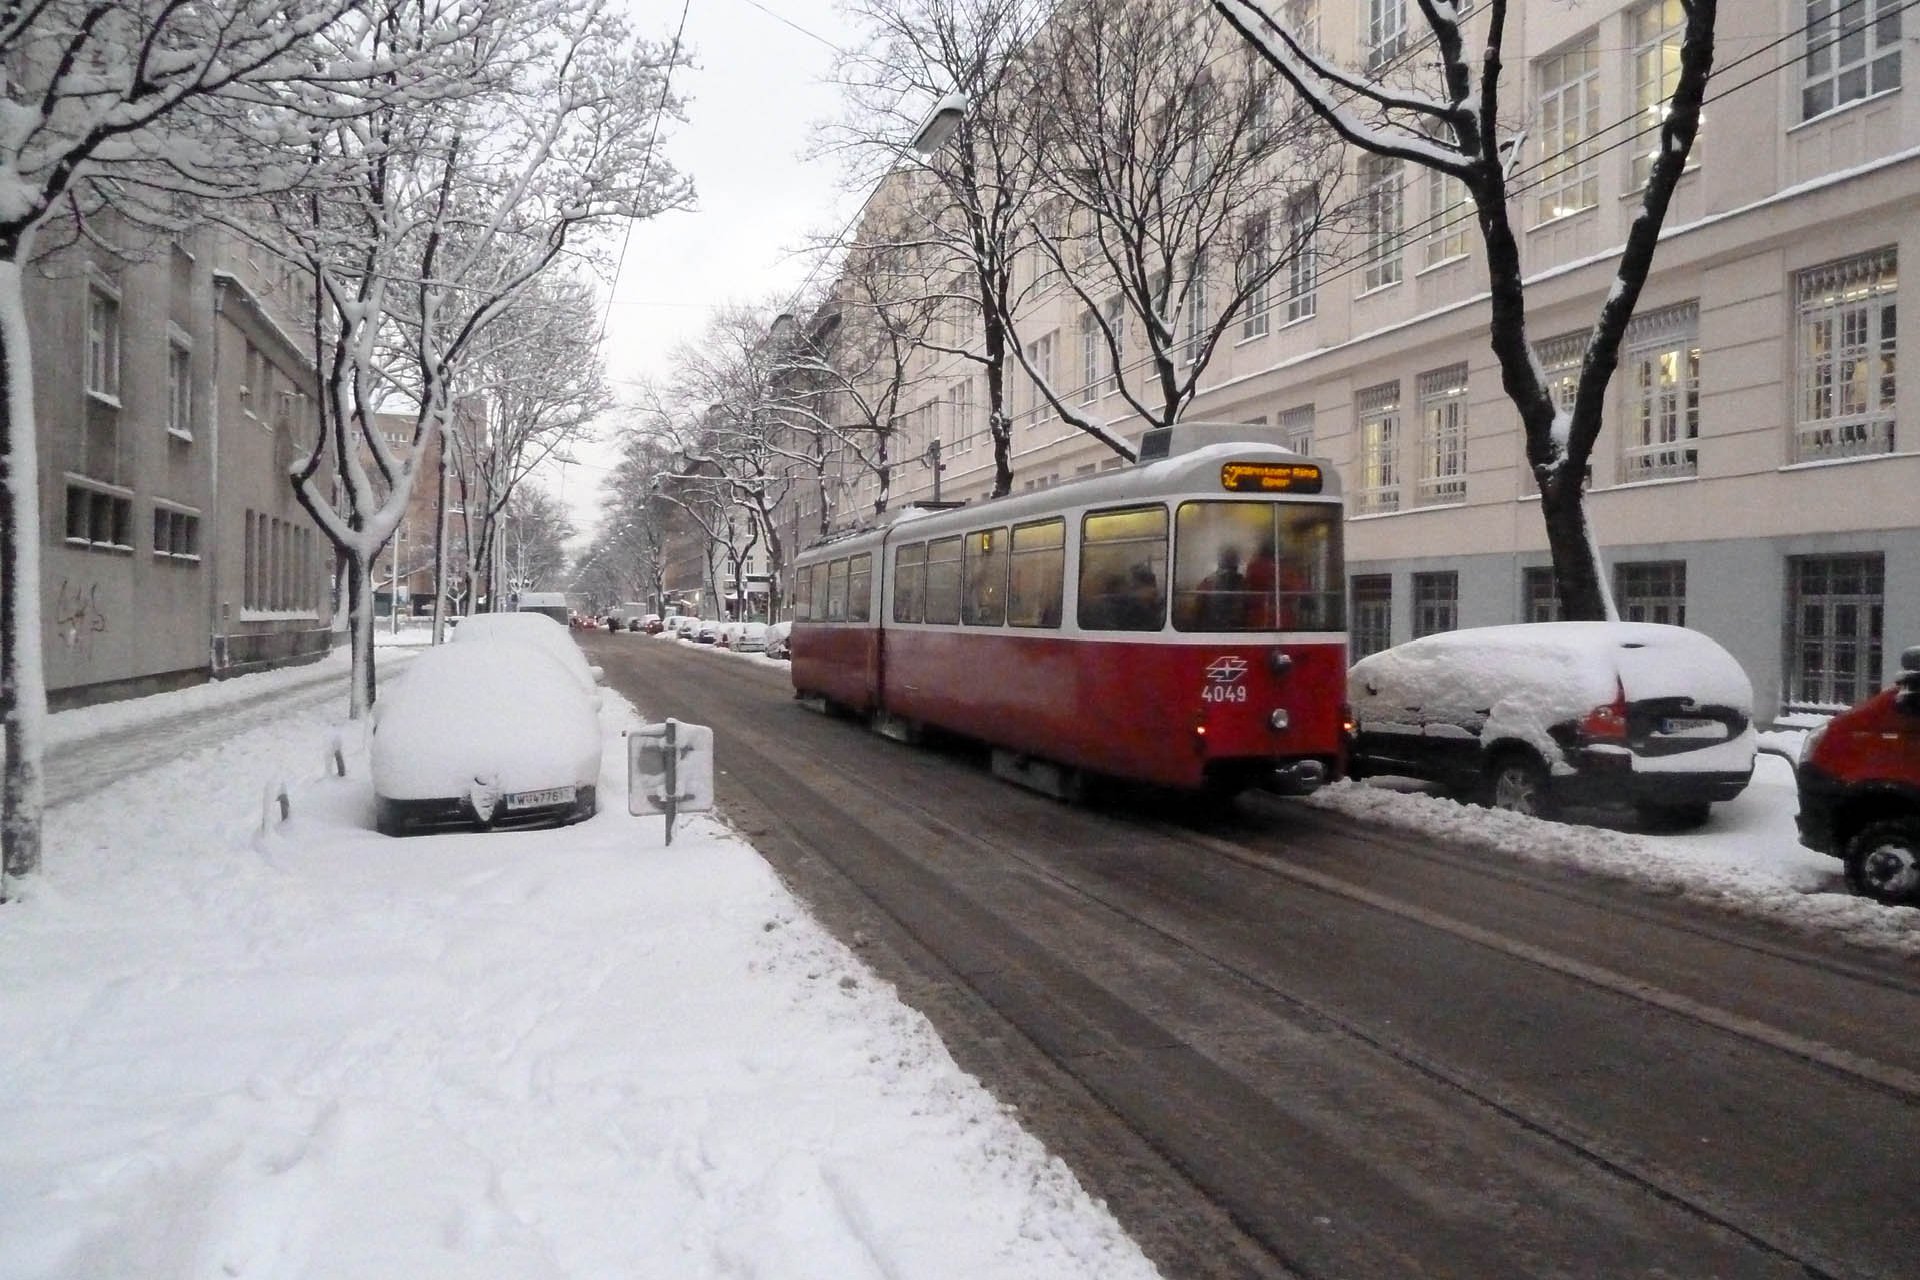 E2 4049 Solo fahrende E2 sieht man nur mehr selten, so z.B. an Tagen mit viel Schnee. Solo E2 trams can be seen rarely now, so only on days after it snowed heavy..